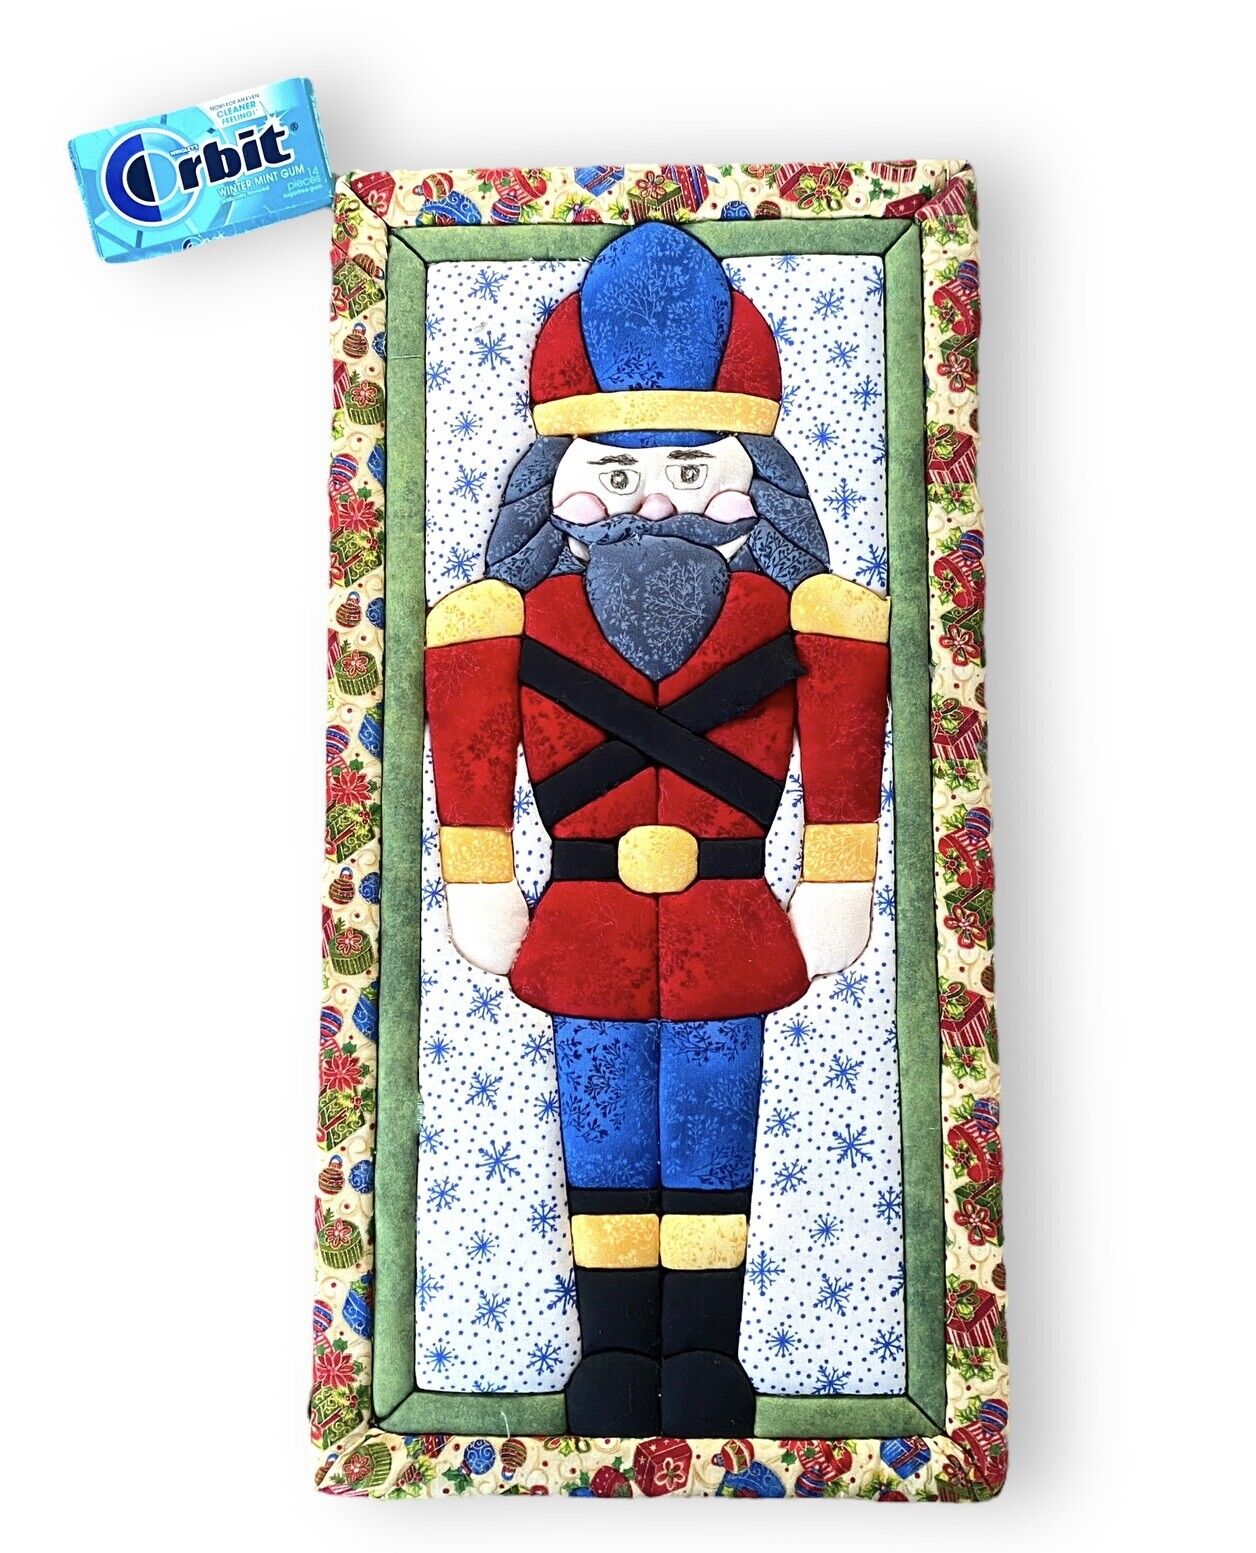 VNTG 80s Hand Quilted Nut Cracker Art Decor Fabric With Foam Core 18.75”X 9.5”